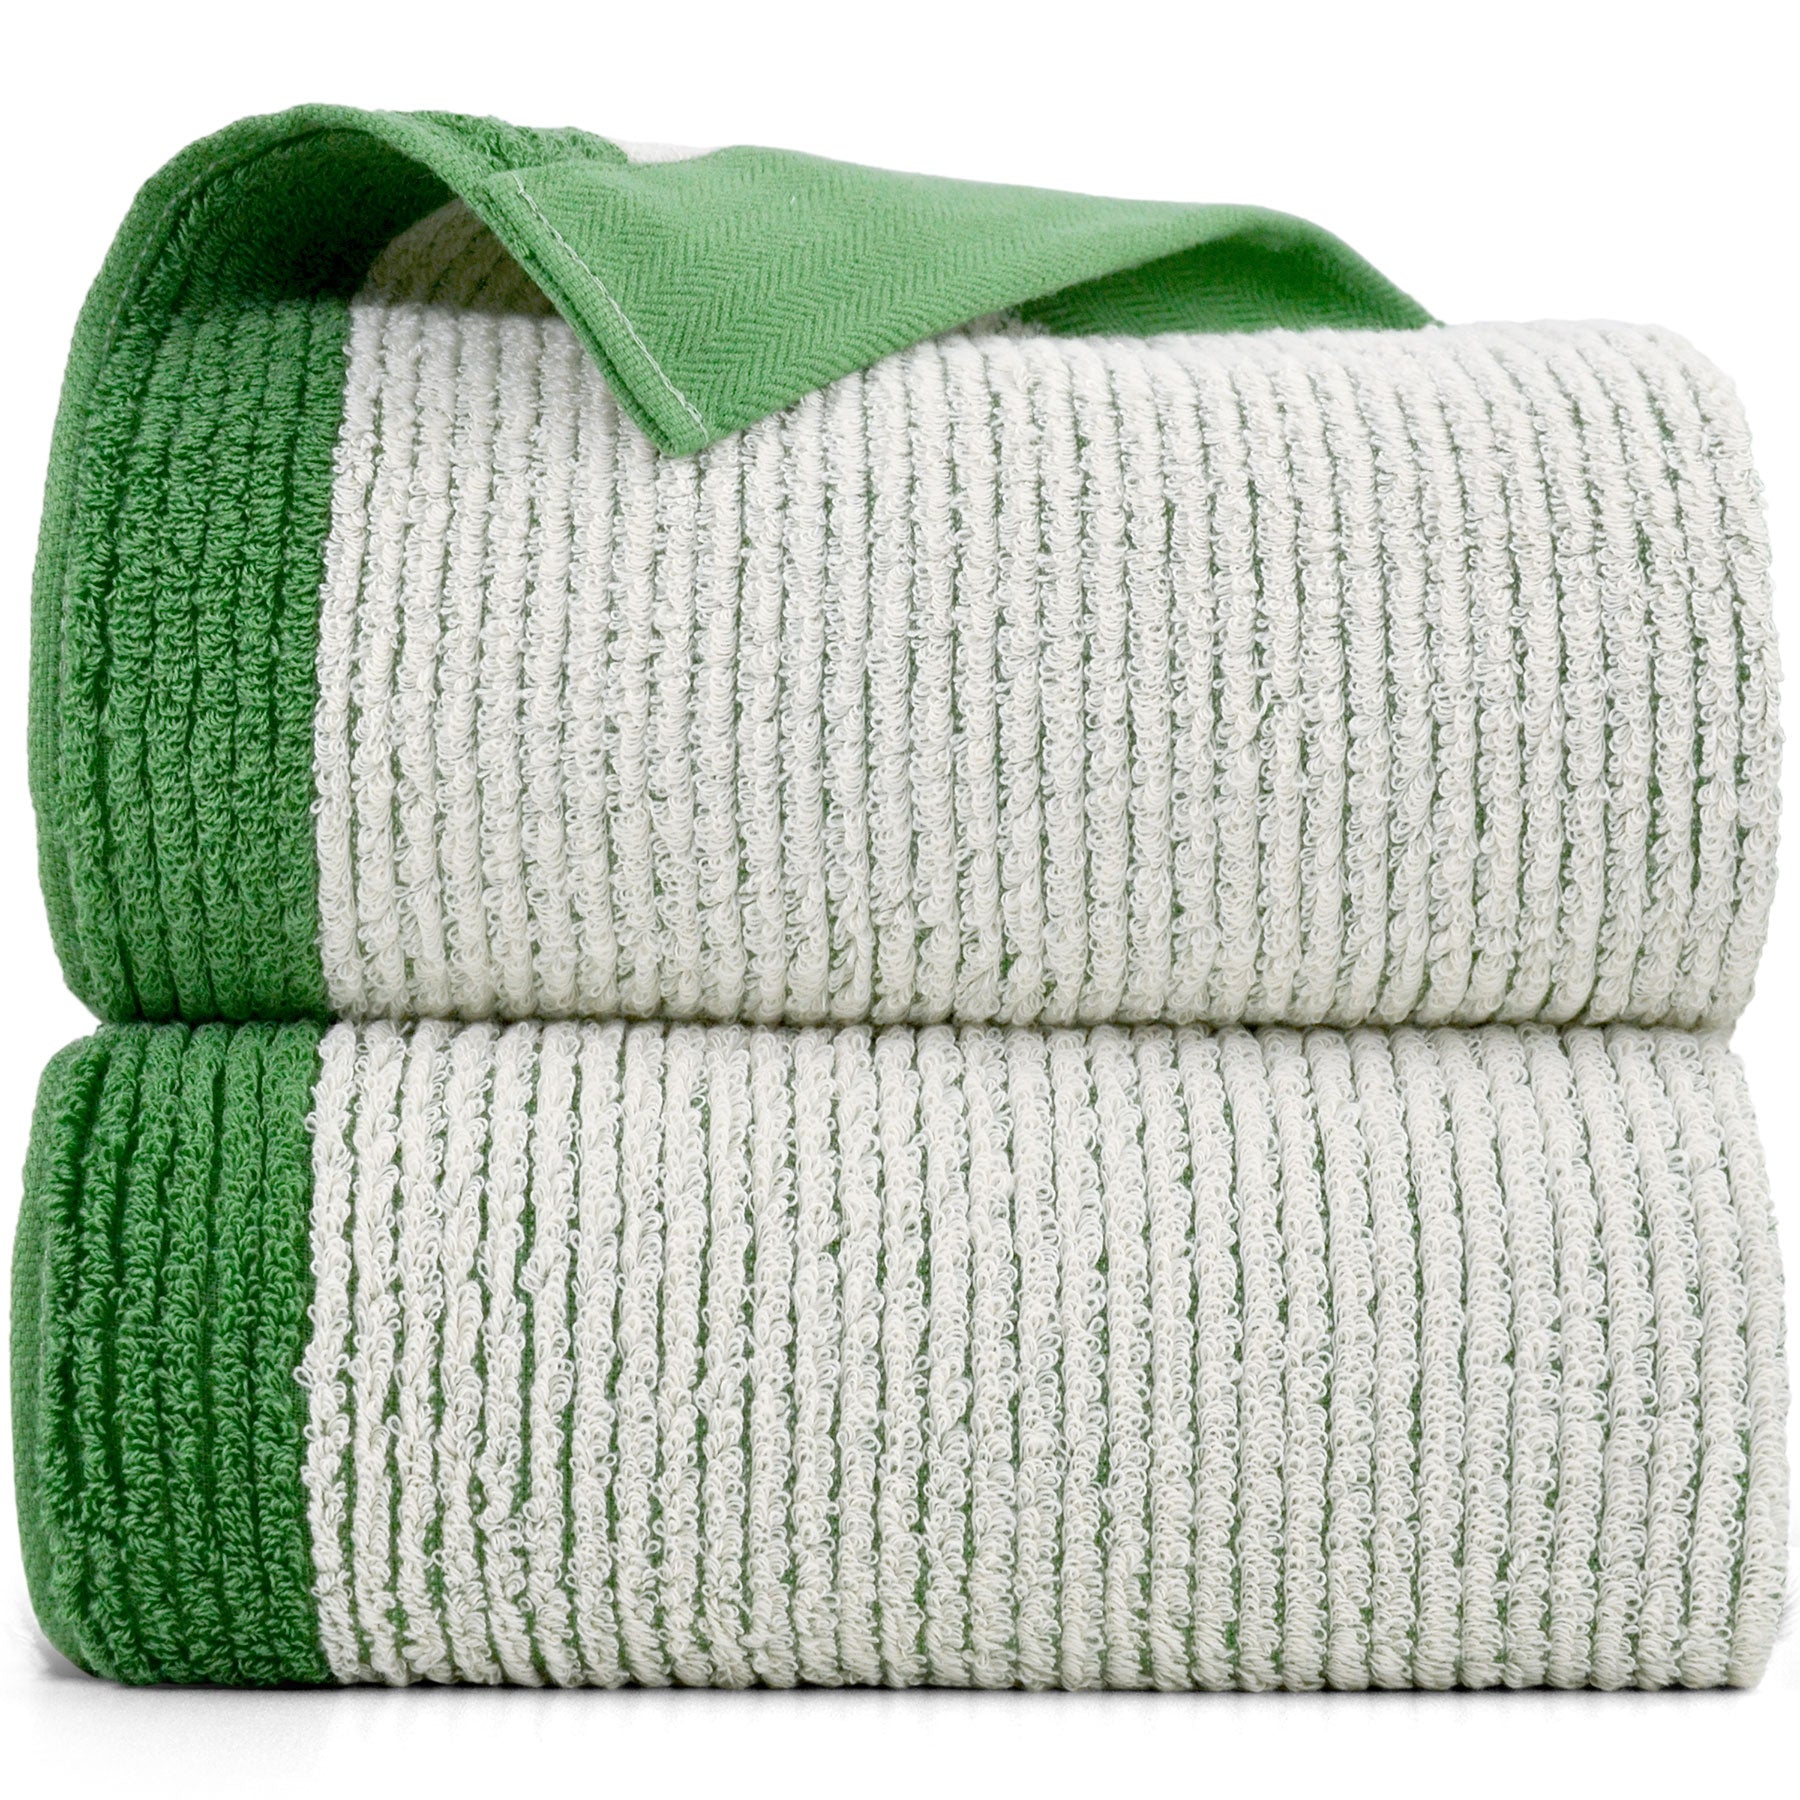 Cleanbear Shower Towel Soft Bath Towels for Bathroom, 2 Cotton Fluffy Towels (520 GSM), 54 x 28 Inches